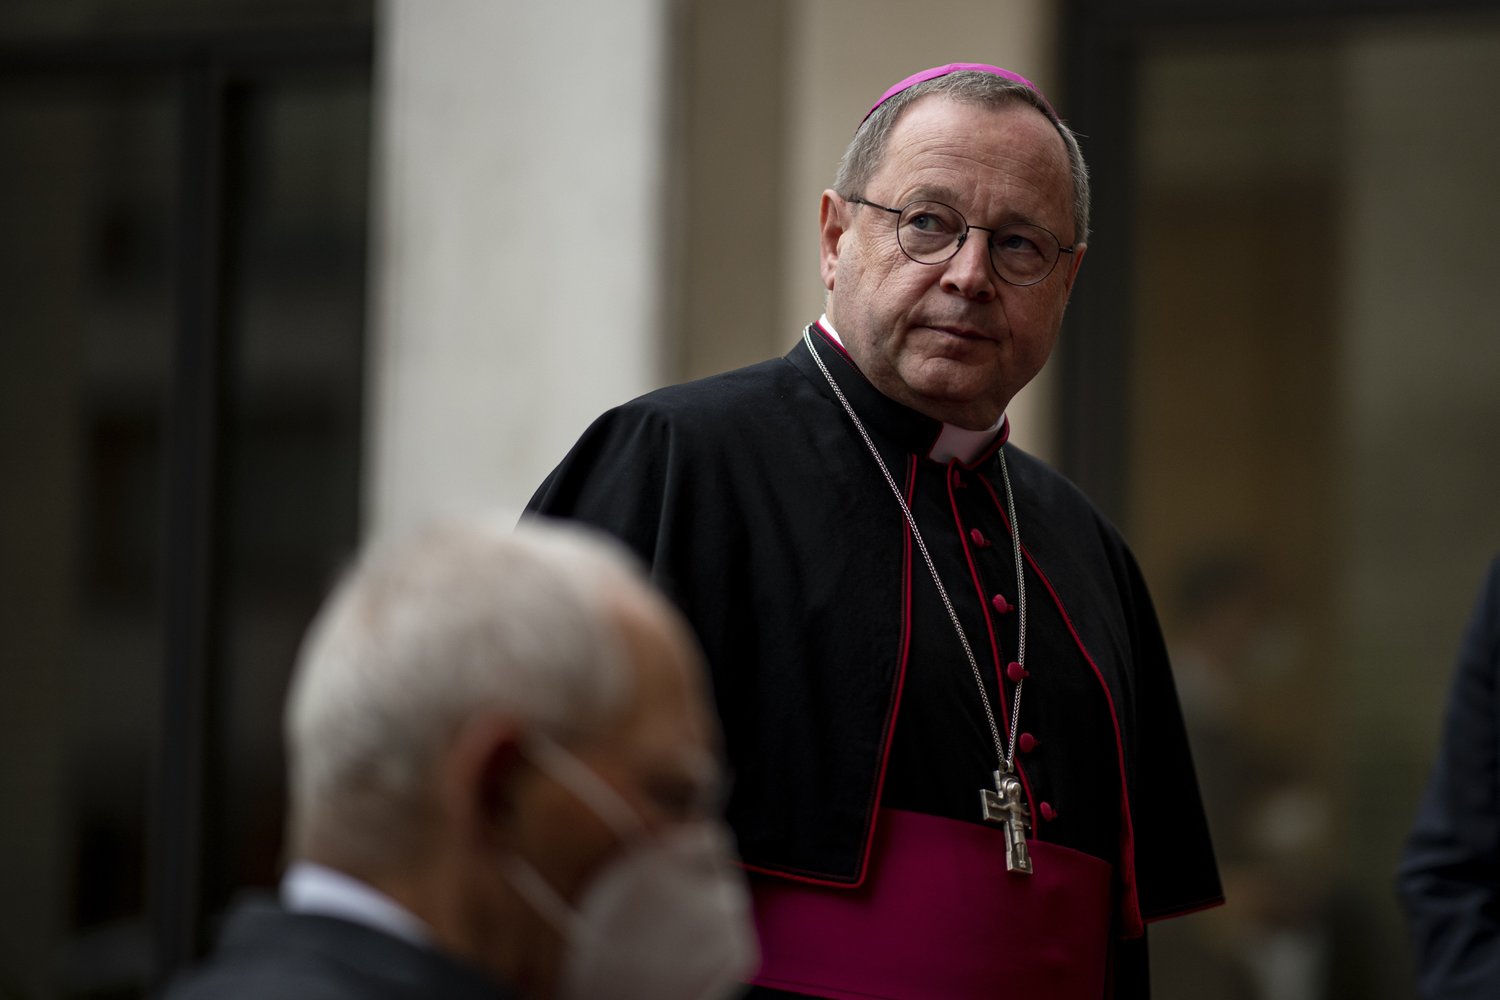 Bishop Georg Bätzing, president of the German bishops' conference, is pictured at the annual St. Michael's reception in Berlin Sept. 27, 2021.